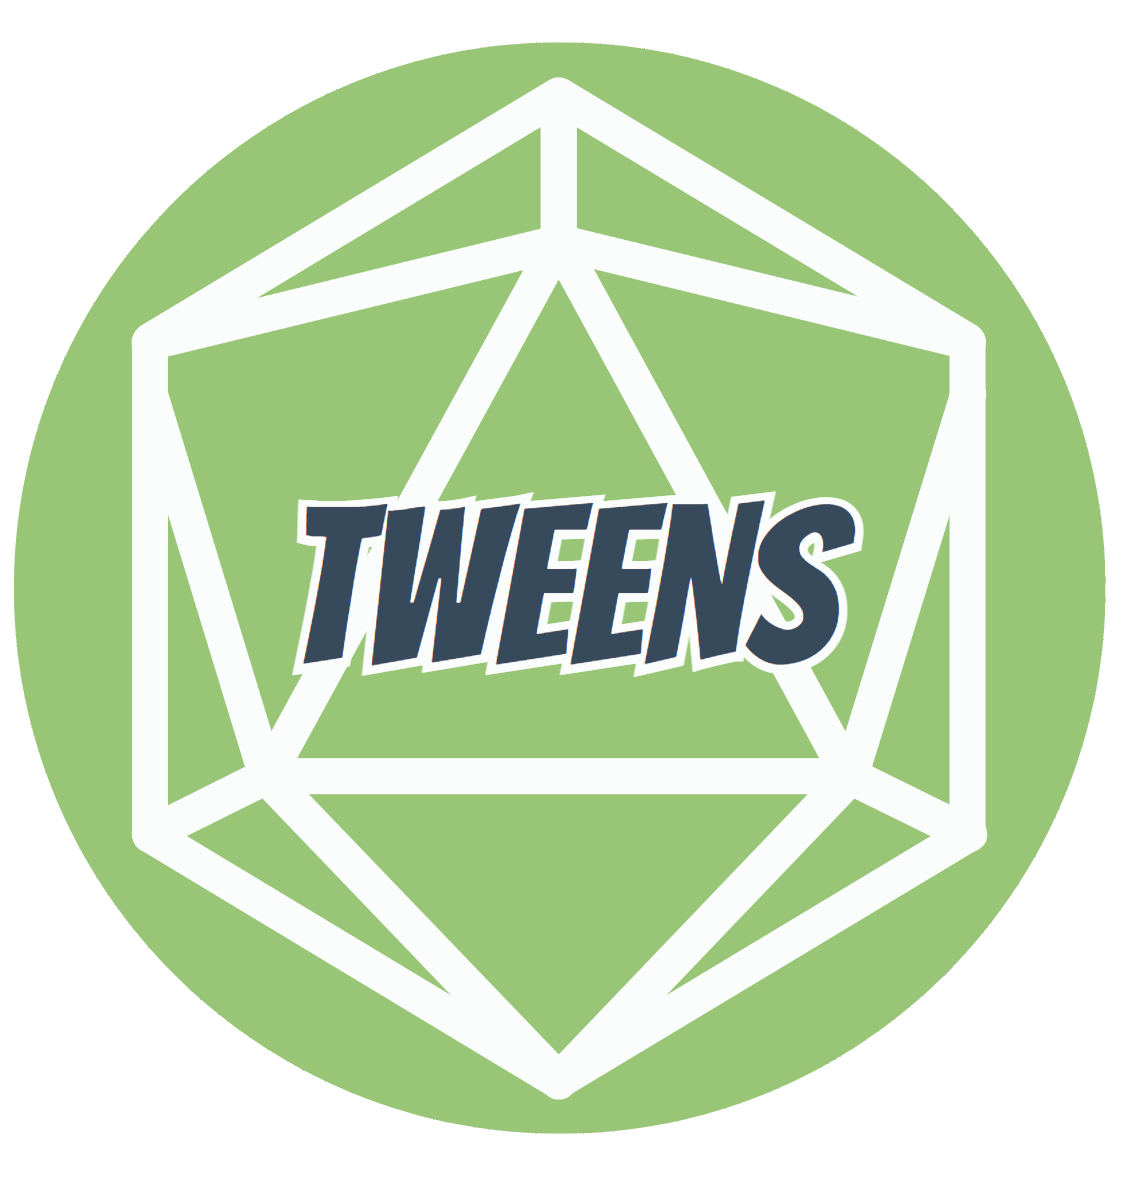 A light green circle with white d20 outline inside of it. Over that, the word "tweens" is written in dark blue font.